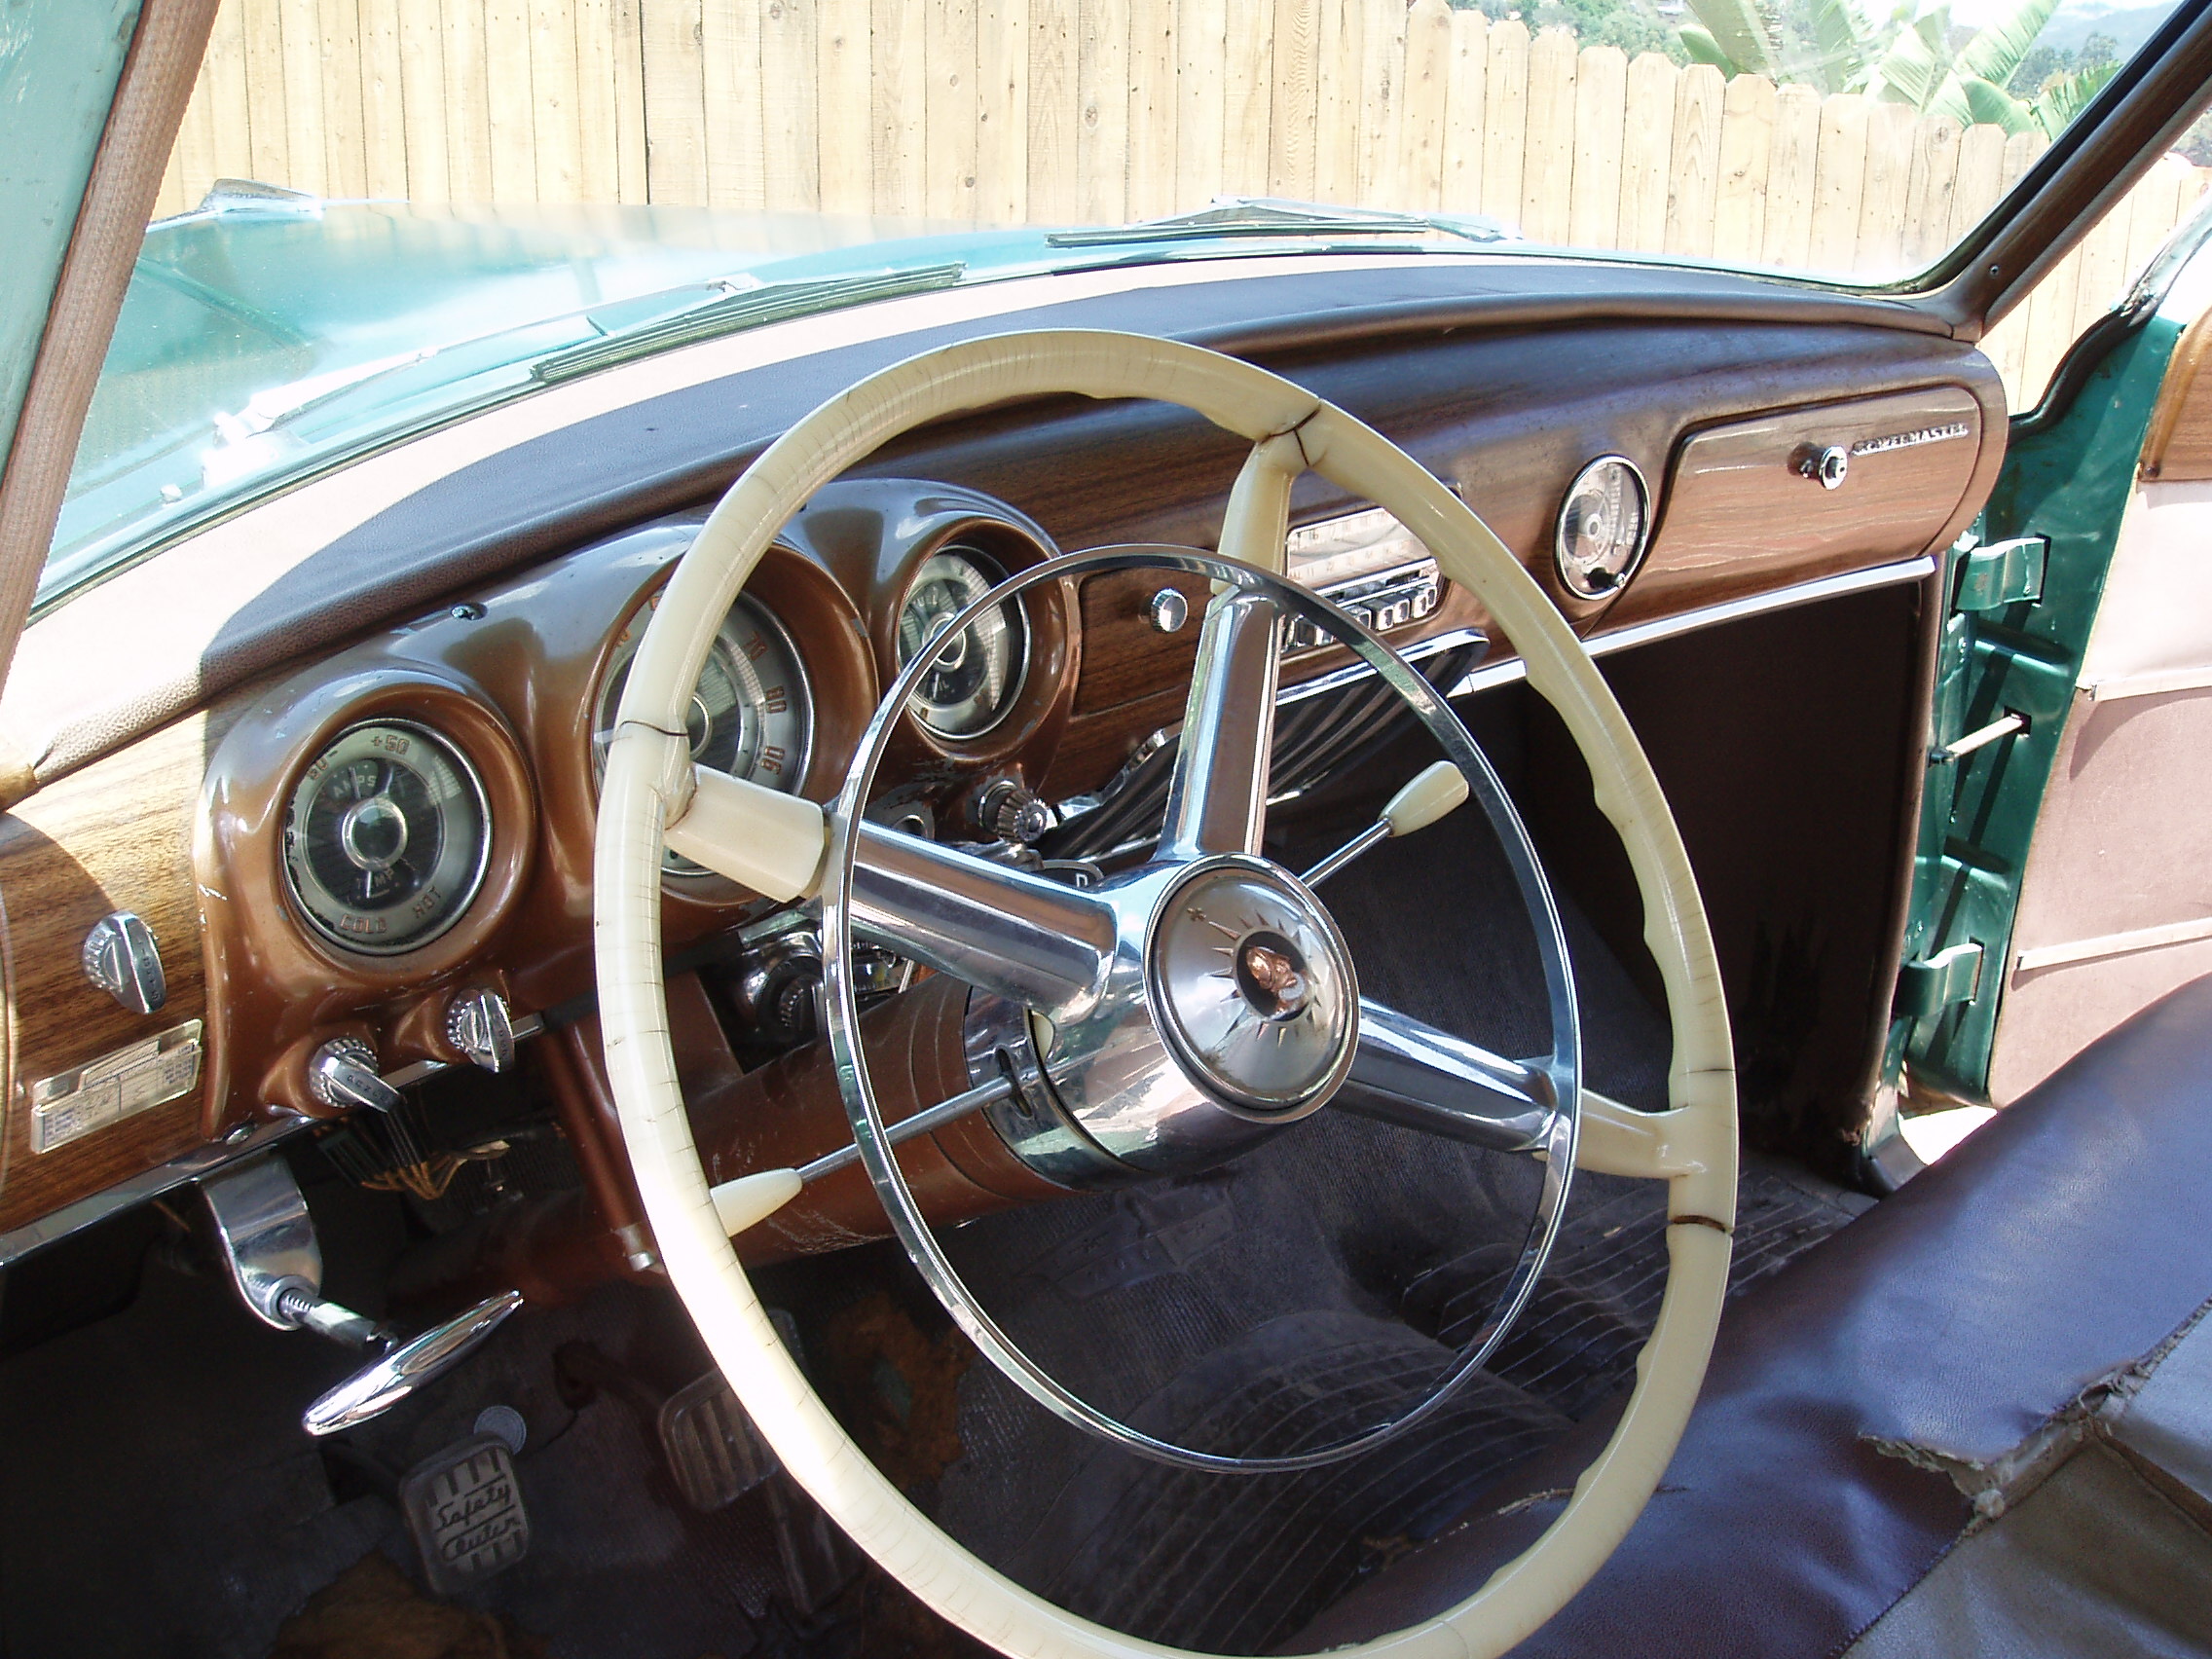 De Soto Powermaster 4dr Photo Gallery: Photo #04 out of 11, Image ...